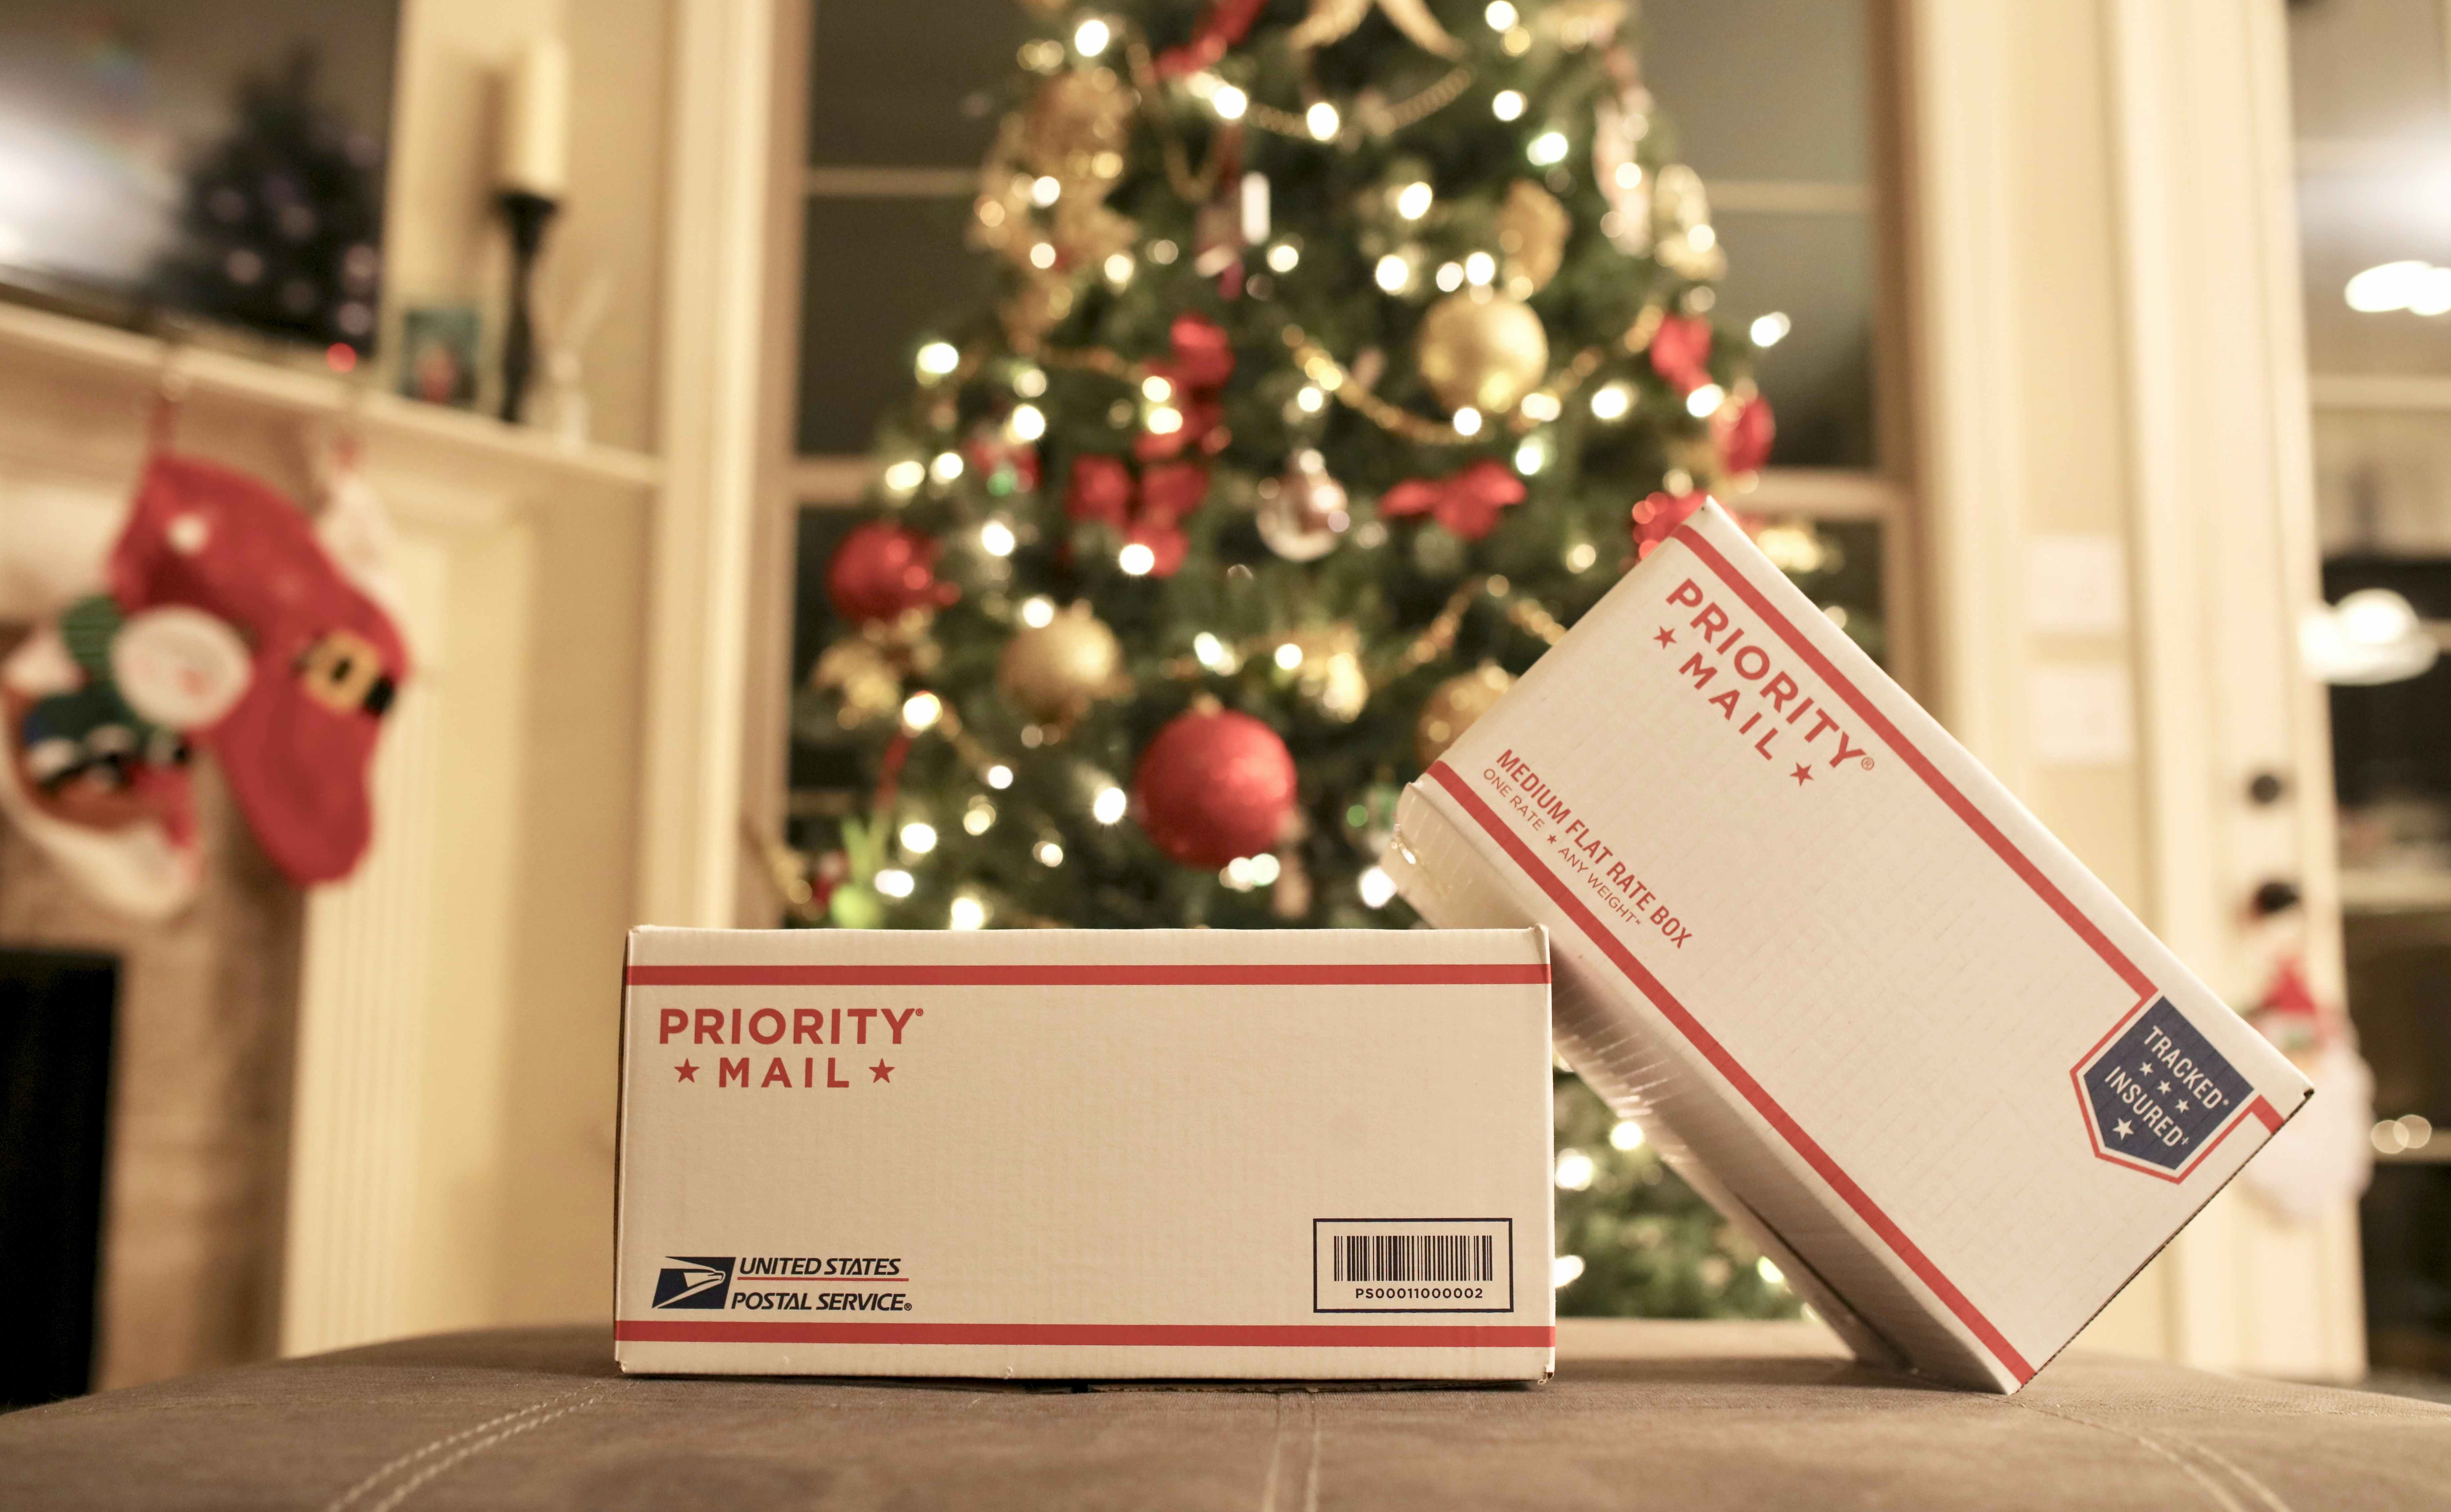 Two U.S. Post Office Priority Mail boxes in front of a Christmas tree.